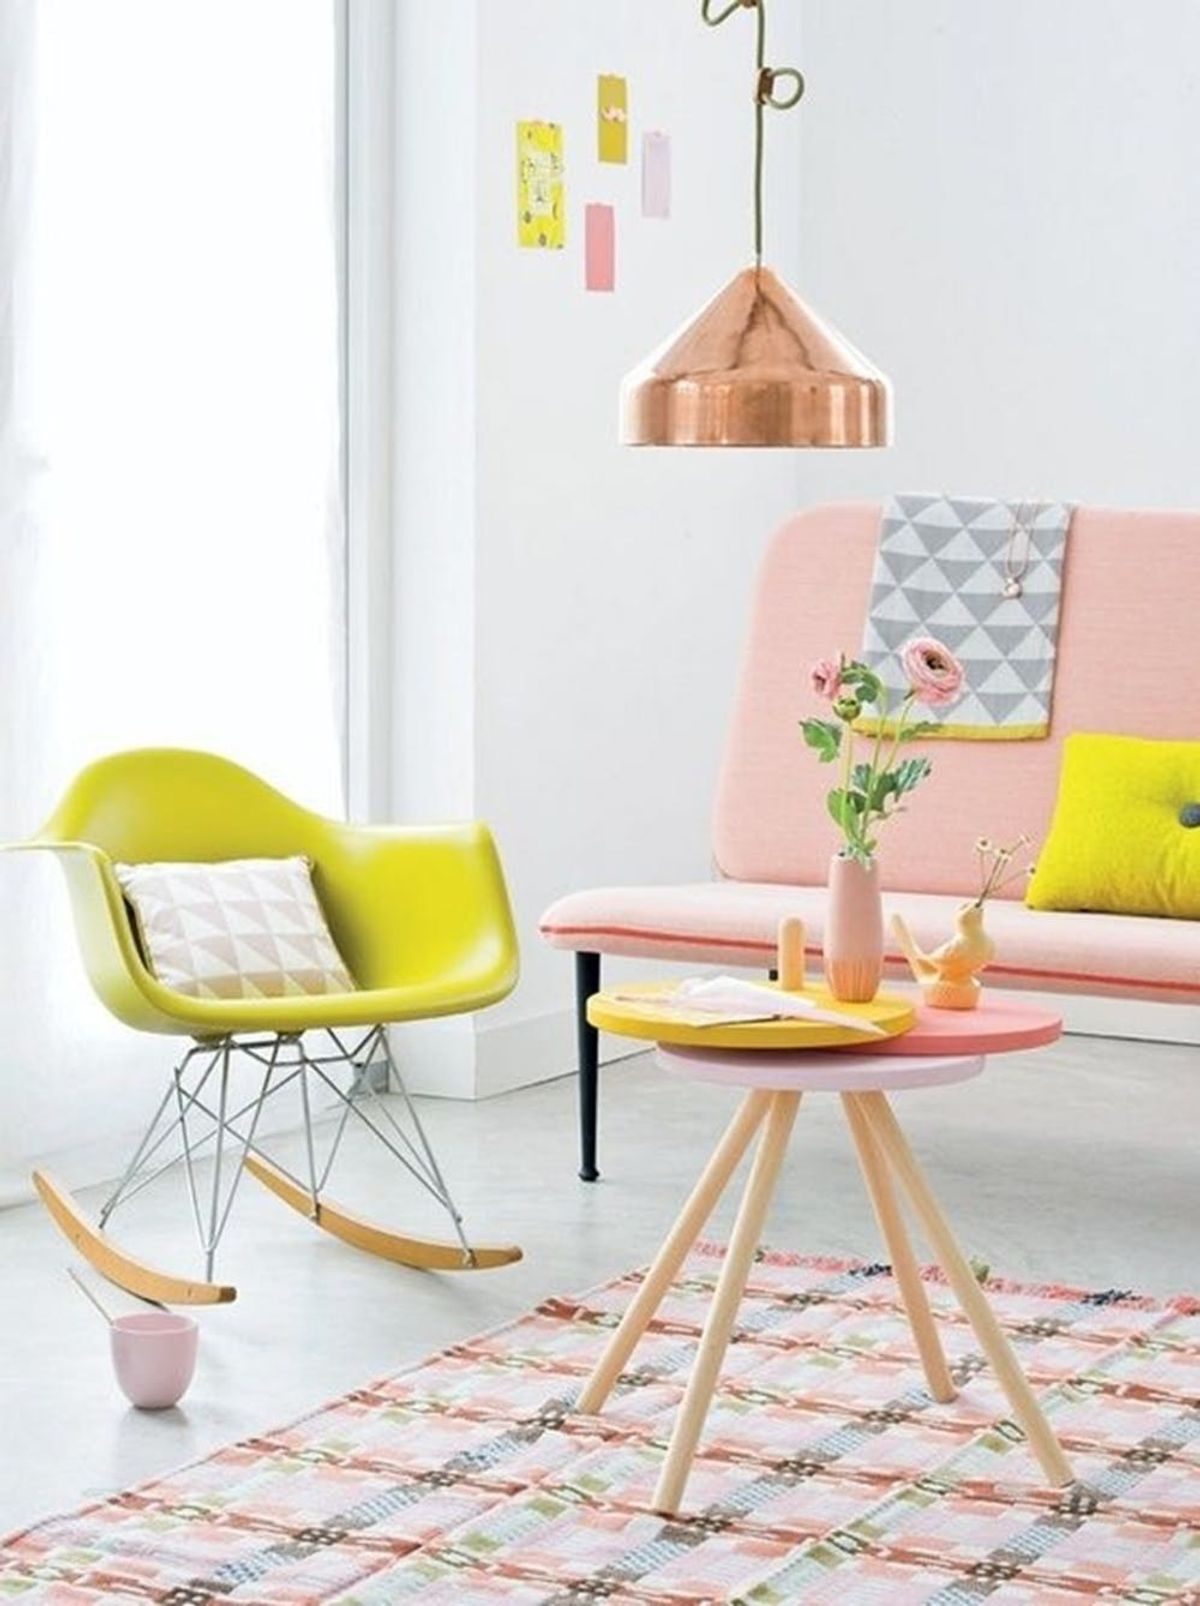 30 Tasteful Ways to Add Colorful Accents to Your Home